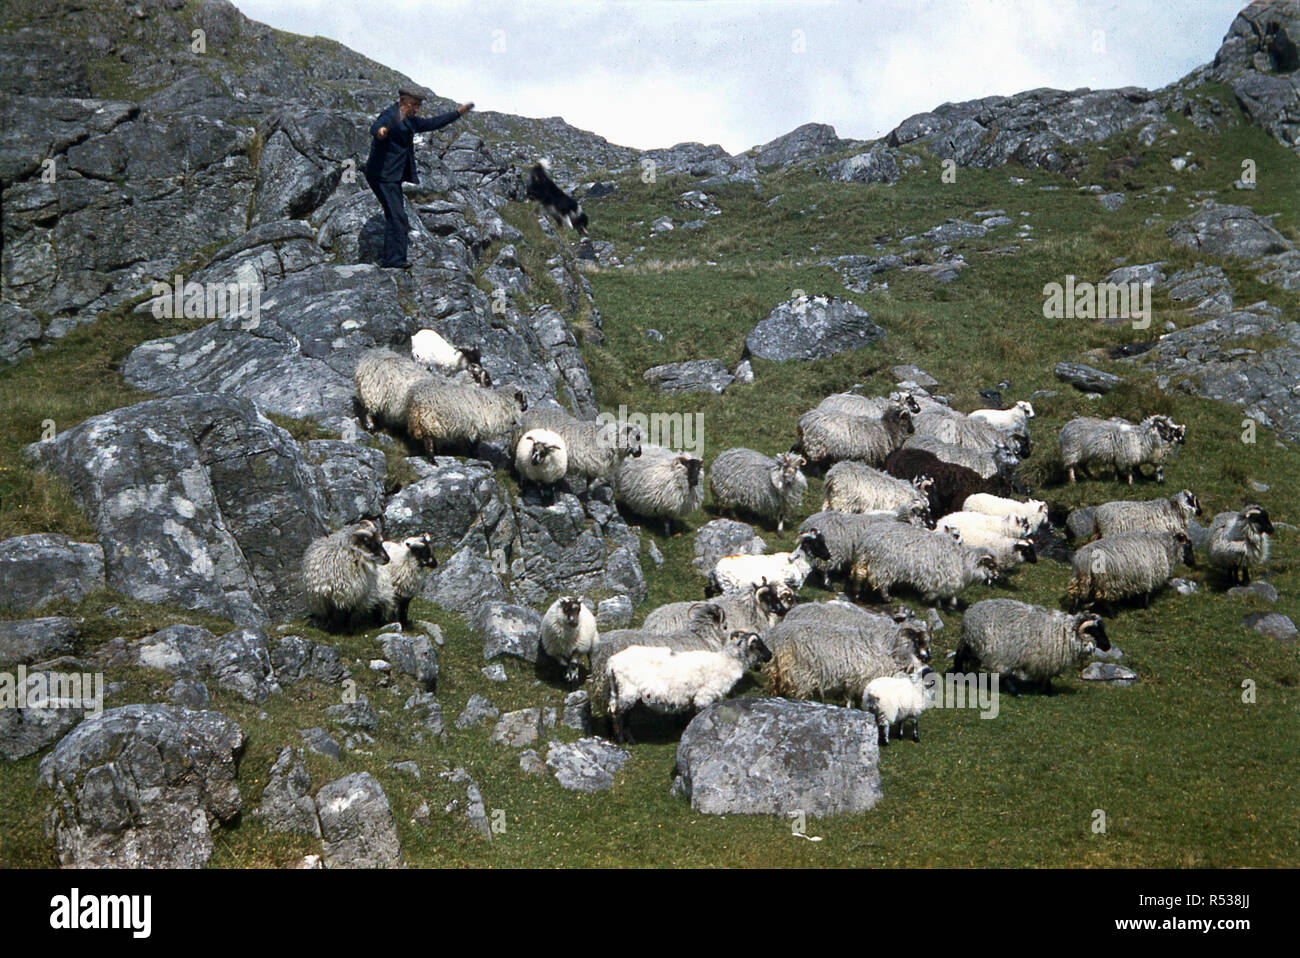 1960s, historical, over rocky island terrain on the Orkneys, a Scottish shepherd and his sheepdog round up a flock of north ronaldsay or orkney sheep, Northern Isles, Scotland, UK. Stock Photo